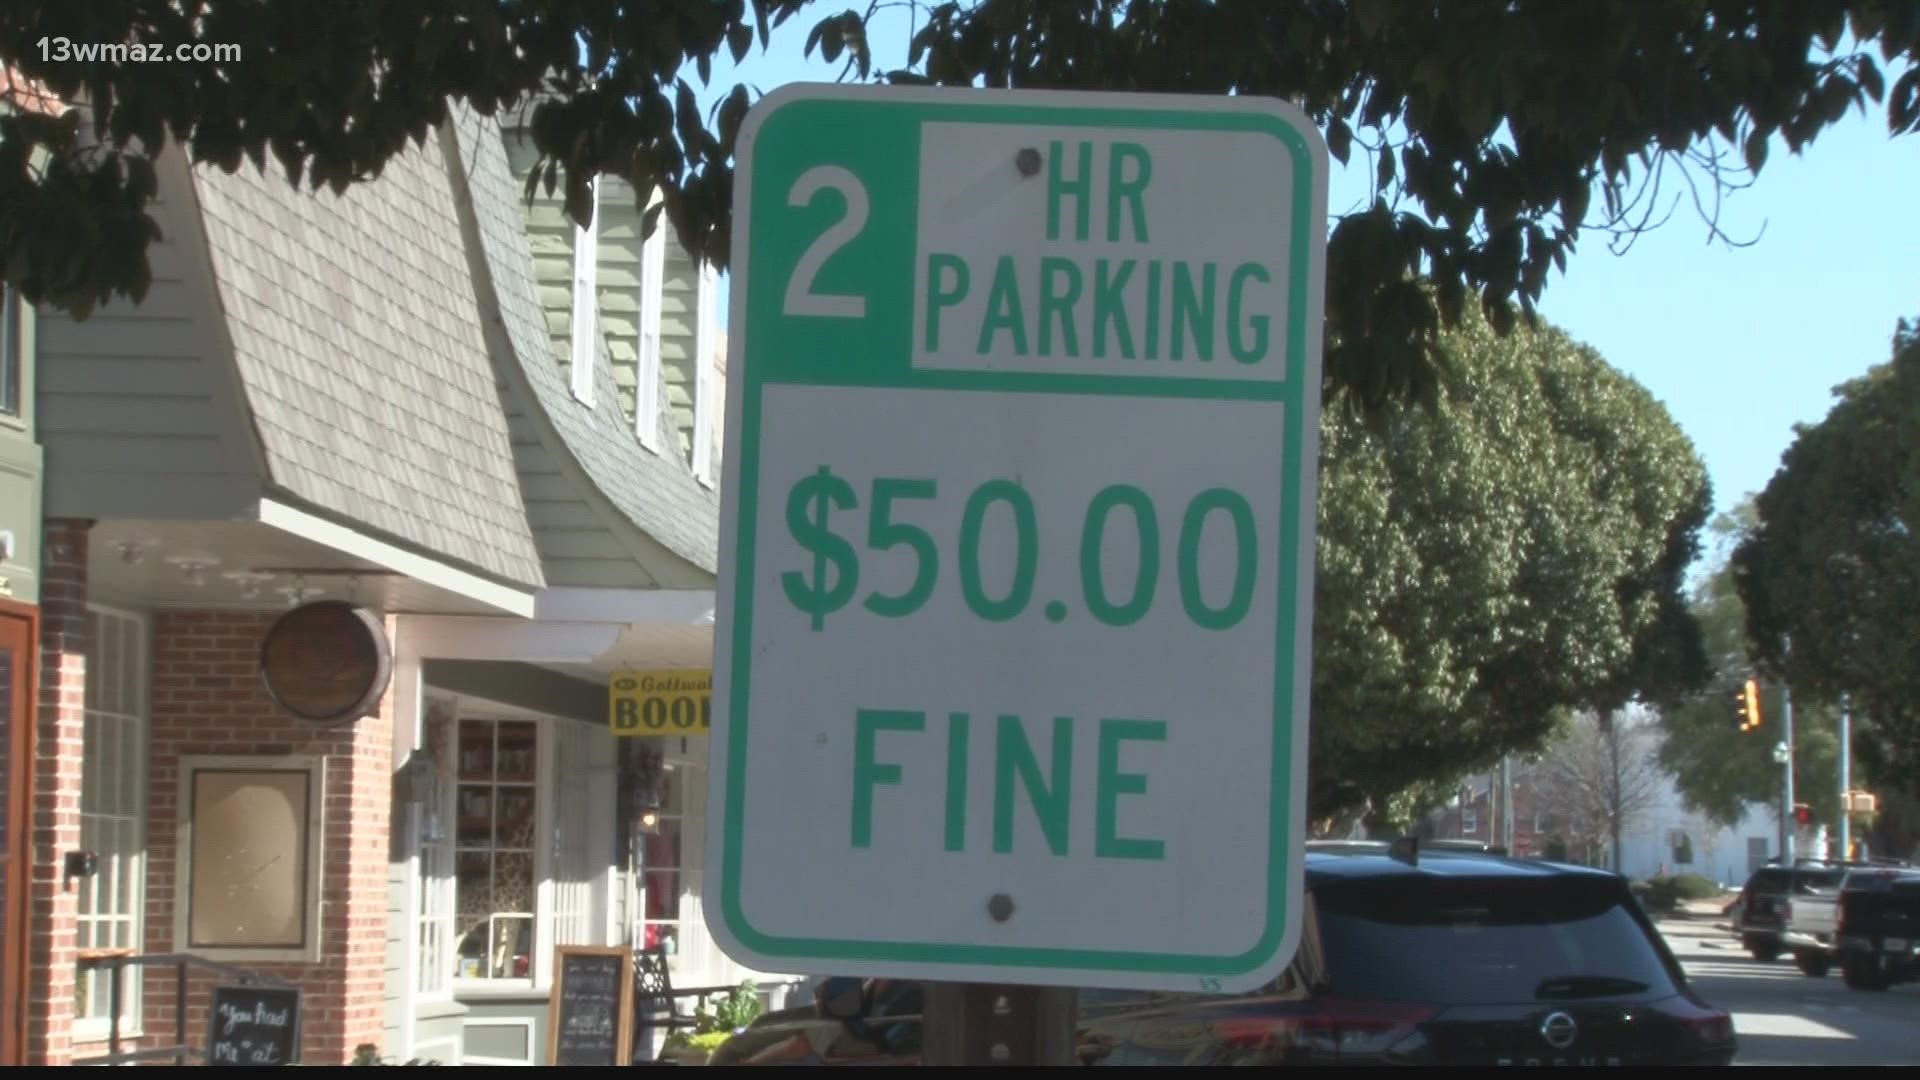 Perry residents say parking downtown is a nightmare, but city officials say they have a plan